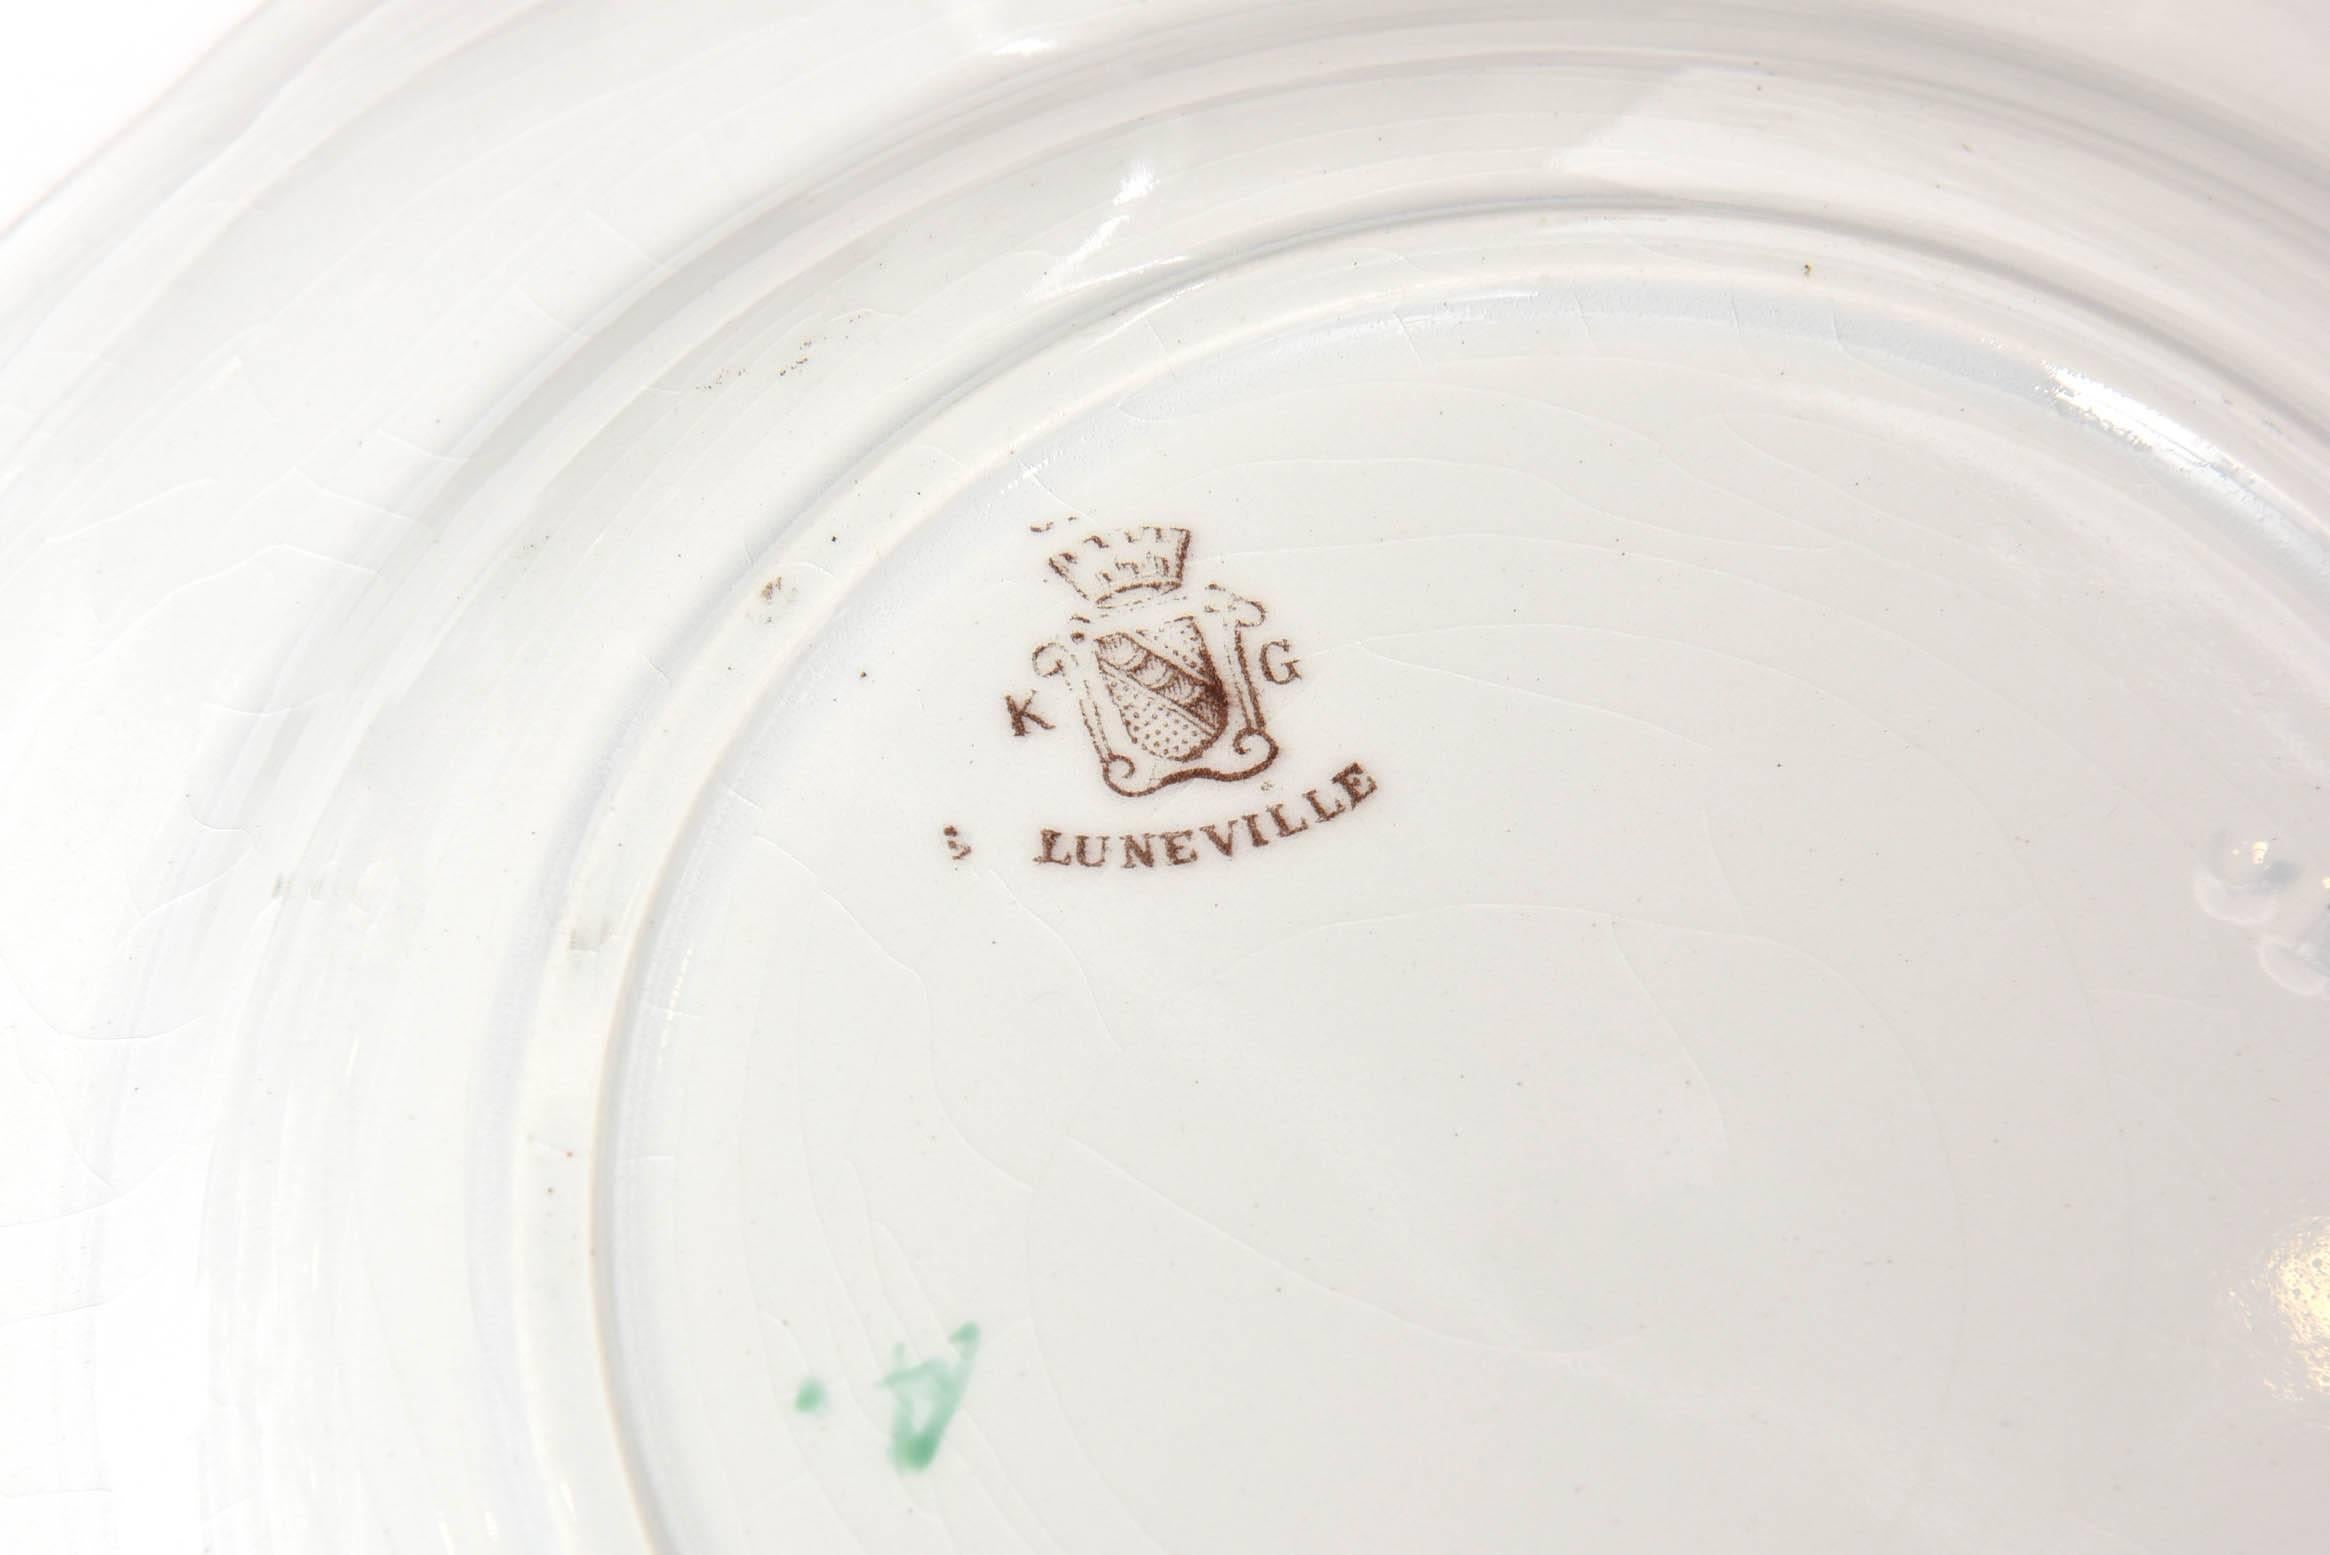 Mid-20th Century 12 Luneville, France Hand Painted, Rose Trim Dinner Plates, Vintage